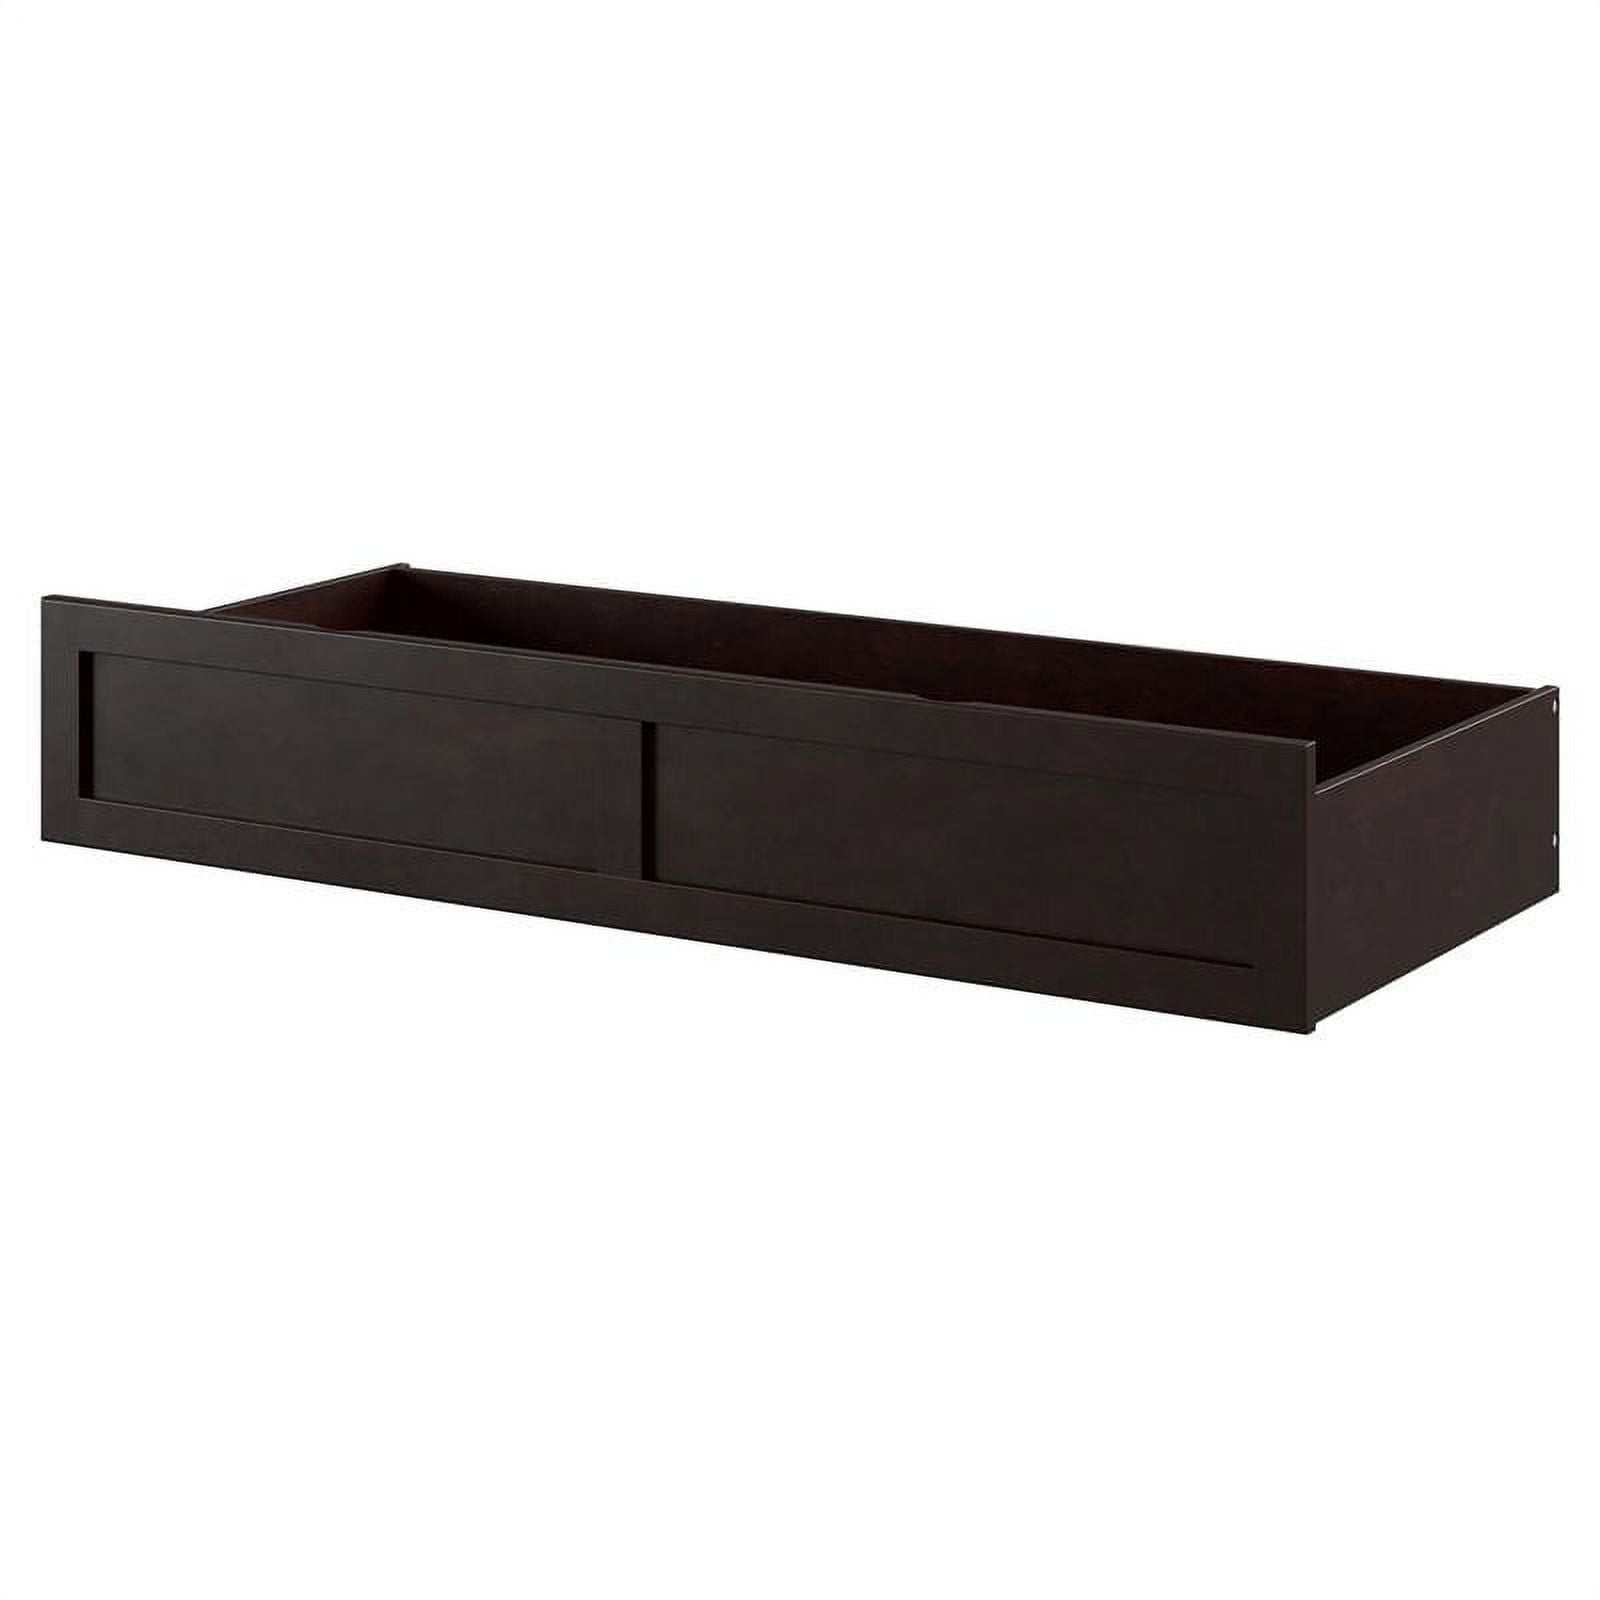 Picture of Atlantic Furniture AG8002341 Queen Size Foot Drawer, Espresso